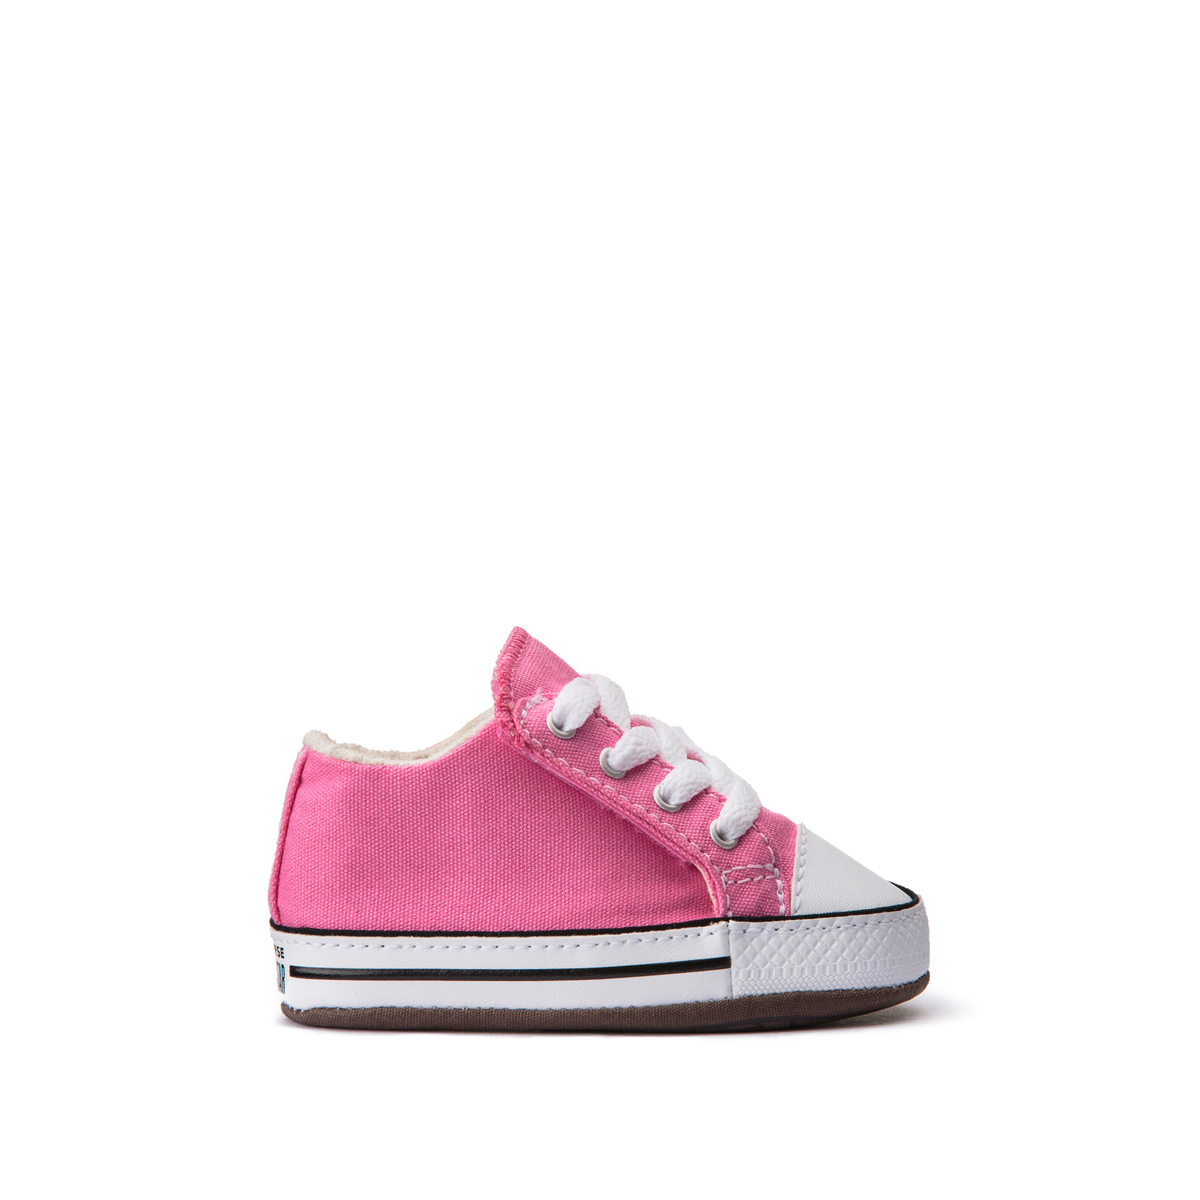 Kids Chuck Taylor All Star Cribster Canvas Trainers